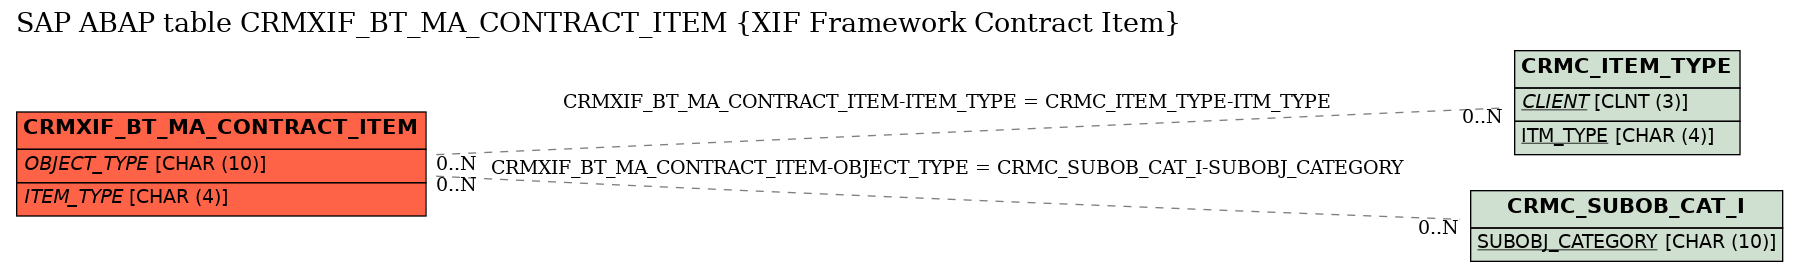 E-R Diagram for table CRMXIF_BT_MA_CONTRACT_ITEM (XIF Framework Contract Item)